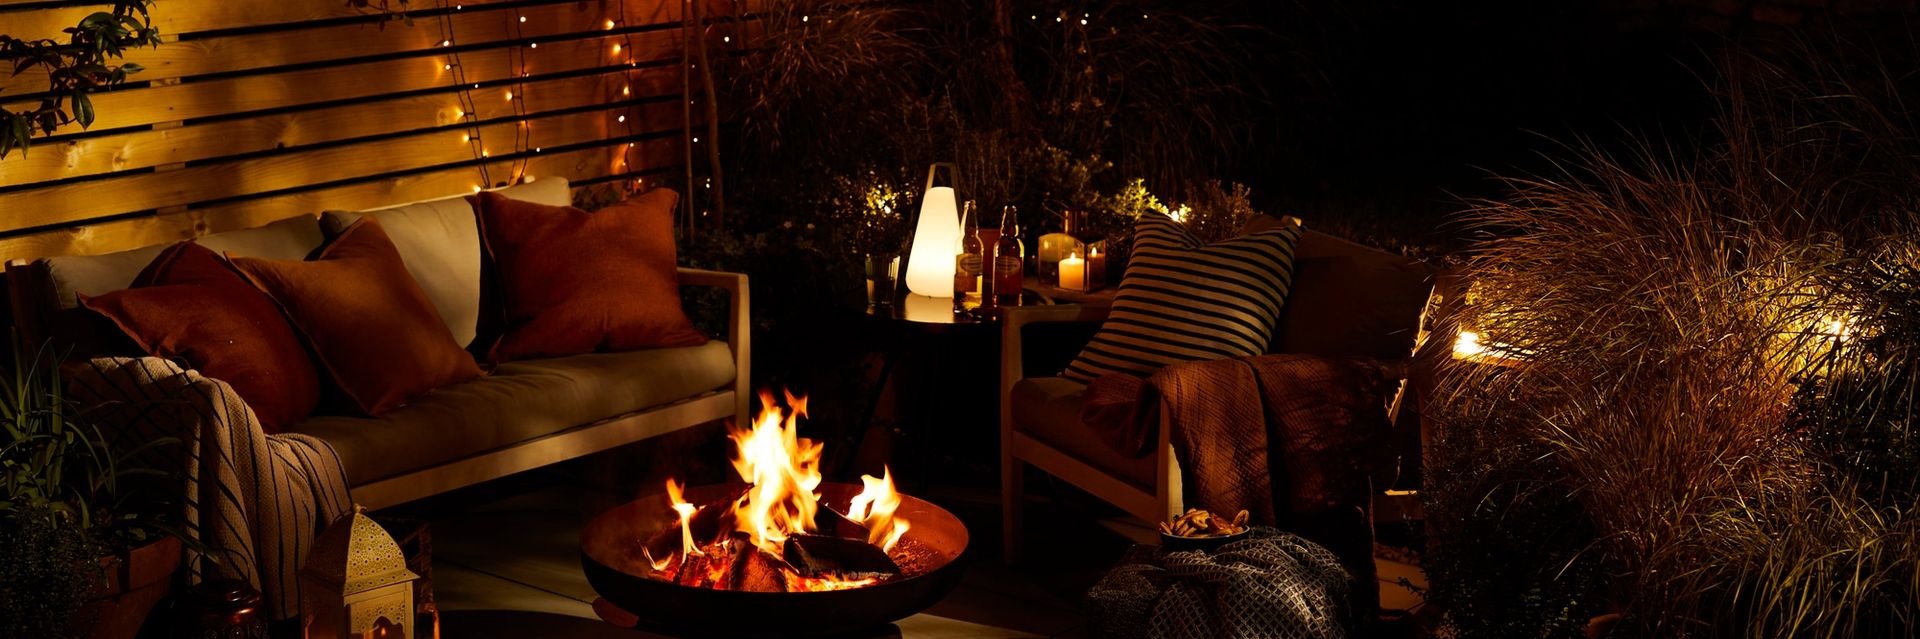 Night time scene in garden with cushioned chairs, candles and a lit fire pit